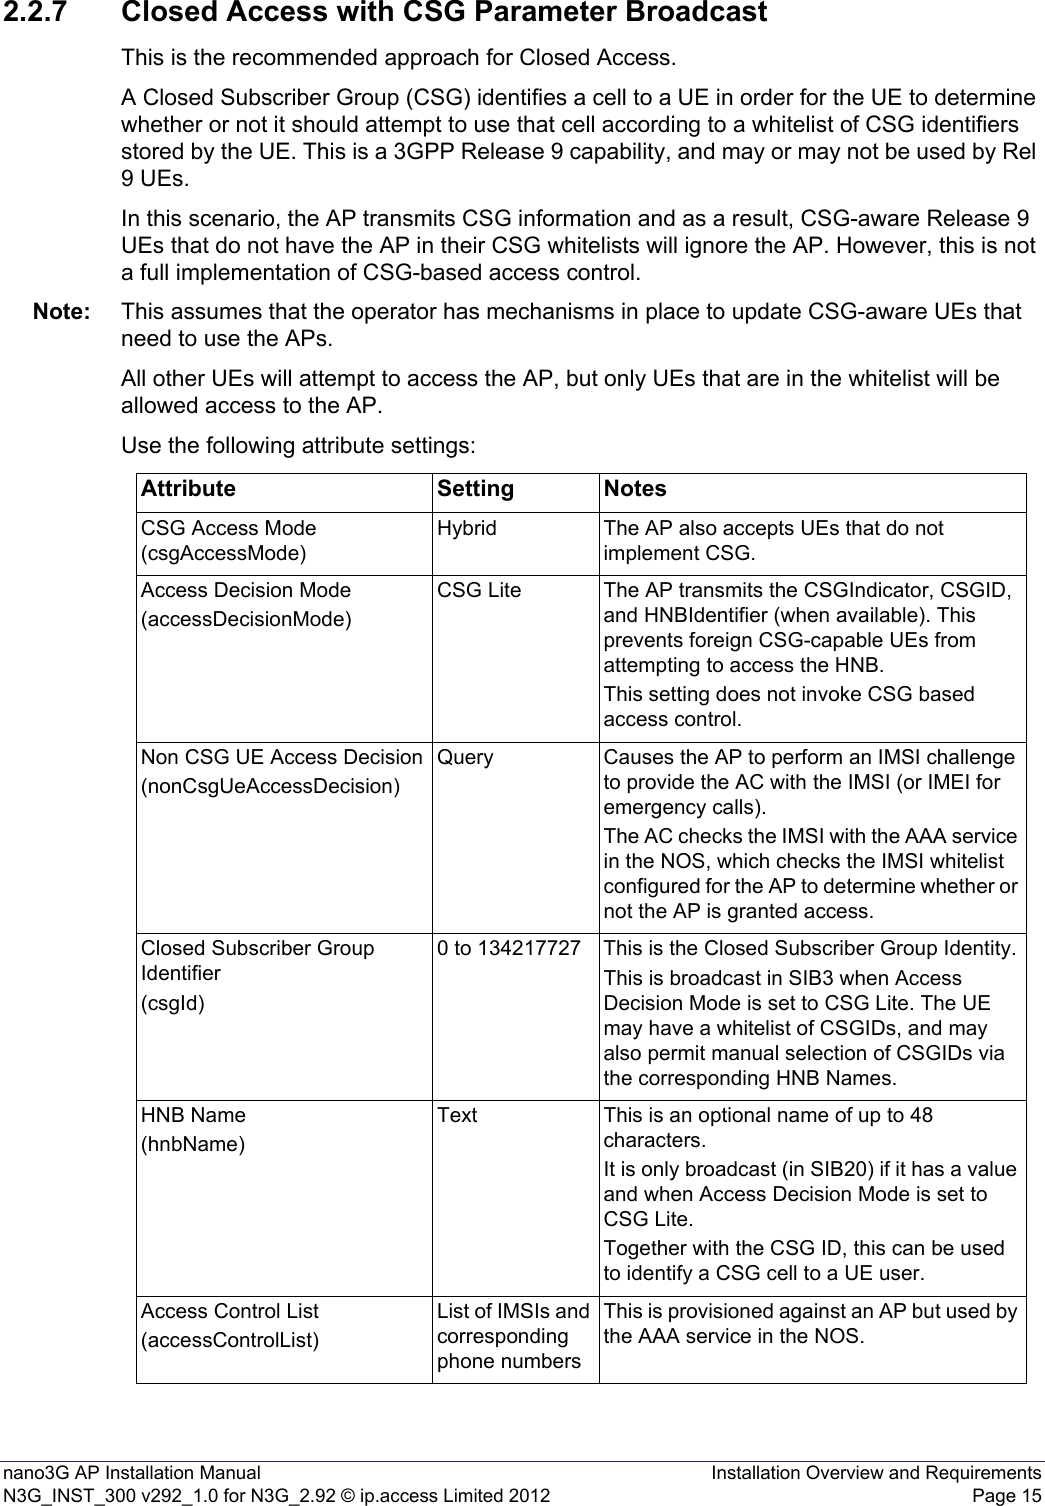 nano3G AP Installation Manual Installation Overview and RequirementsN3G_INST_300 v292_1.0 for N3G_2.92 © ip.access Limited 2012 Page 152.2.7 Closed Access with CSG Parameter BroadcastThis is the recommended approach for Closed Access.A Closed Subscriber Group (CSG) identifies a cell to a UE in order for the UE to determine whether or not it should attempt to use that cell according to a whitelist of CSG identifiers stored by the UE. This is a 3GPP Release 9 capability, and may or may not be used by Rel 9 UEs. In this scenario, the AP transmits CSG information and as a result, CSG-aware Release 9 UEs that do not have the AP in their CSG whitelists will ignore the AP. However, this is not a full implementation of CSG-based access control.Note: This assumes that the operator has mechanisms in place to update CSG-aware UEs that need to use the APs.All other UEs will attempt to access the AP, but only UEs that are in the whitelist will be allowed access to the AP.Use the following attribute settings:Attribute Setting NotesCSG Access Mode (csgAccessMode)Hybrid The AP also accepts UEs that do not implement CSG.Access Decision Mode(accessDecisionMode)CSG Lite The AP transmits the CSGIndicator, CSGID, and HNBIdentifier (when available). This prevents foreign CSG-capable UEs from attempting to access the HNB.This setting does not invoke CSG based access control.Non CSG UE Access Decision(nonCsgUeAccessDecision)Query Causes the AP to perform an IMSI challenge to provide the AC with the IMSI (or IMEI for emergency calls).The AC checks the IMSI with the AAA service in the NOS, which checks the IMSI whitelist configured for the AP to determine whether or not the AP is granted access.Closed Subscriber Group Identifier(csgId)0 to 134217727 This is the Closed Subscriber Group Identity.This is broadcast in SIB3 when Access Decision Mode is set to CSG Lite. The UE may have a whitelist of CSGIDs, and may also permit manual selection of CSGIDs via the corresponding HNB Names.HNB Name(hnbName)Text This is an optional name of up to 48 characters.It is only broadcast (in SIB20) if it has a value and when Access Decision Mode is set to CSG Lite.Together with the CSG ID, this can be used to identify a CSG cell to a UE user.Access Control List(accessControlList)List of IMSIs and corresponding phone numbersThis is provisioned against an AP but used by the AAA service in the NOS.